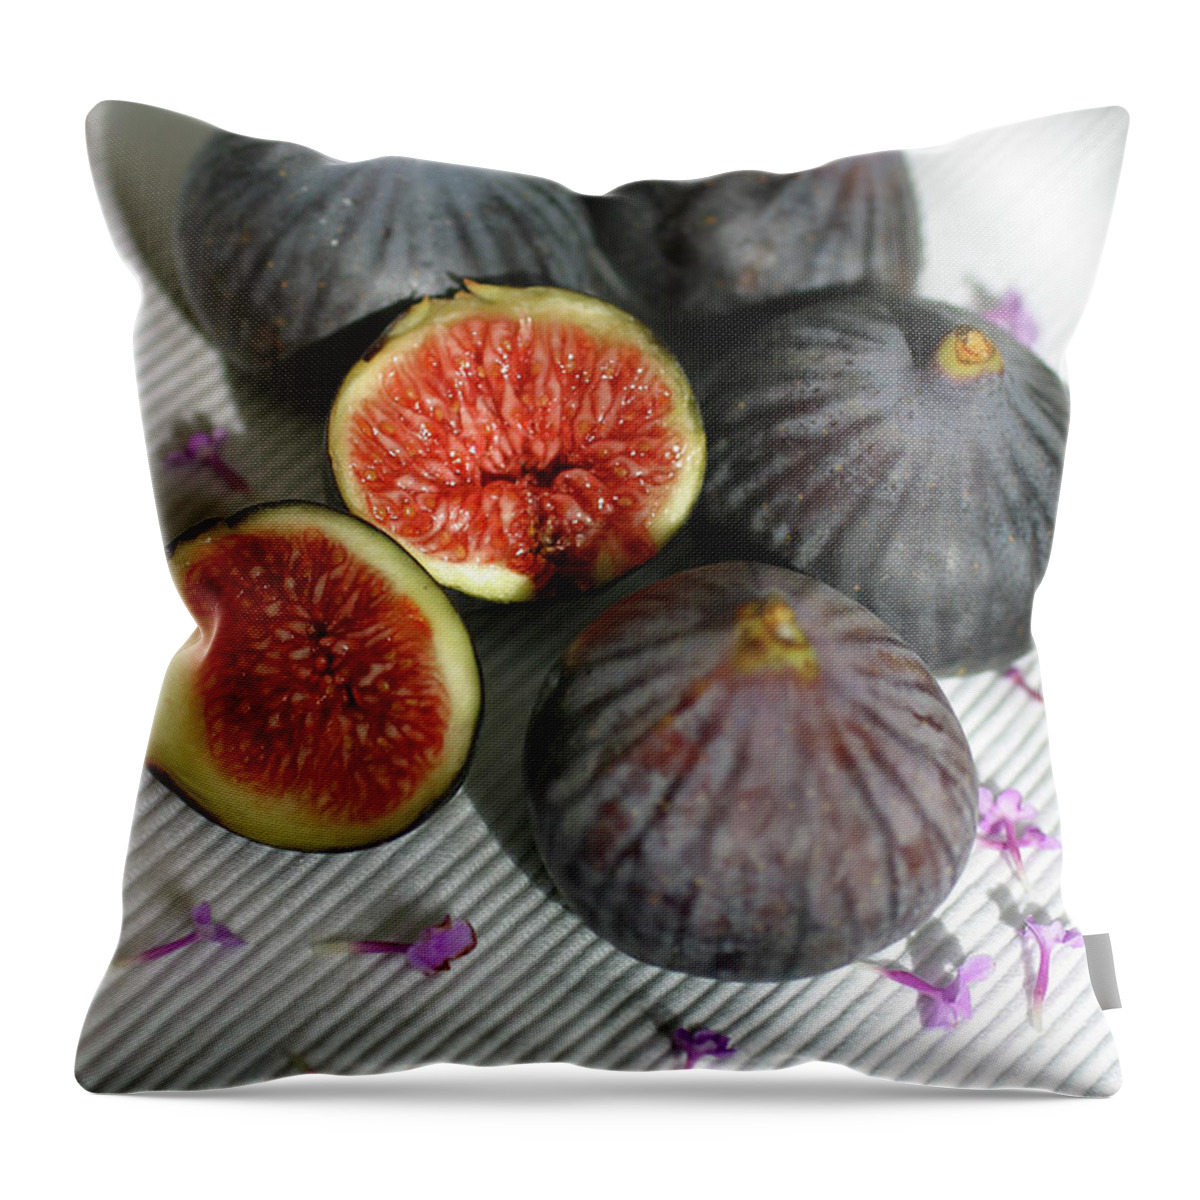 Tunisia Throw Pillow featuring the photograph Black Figs by Lucgillet